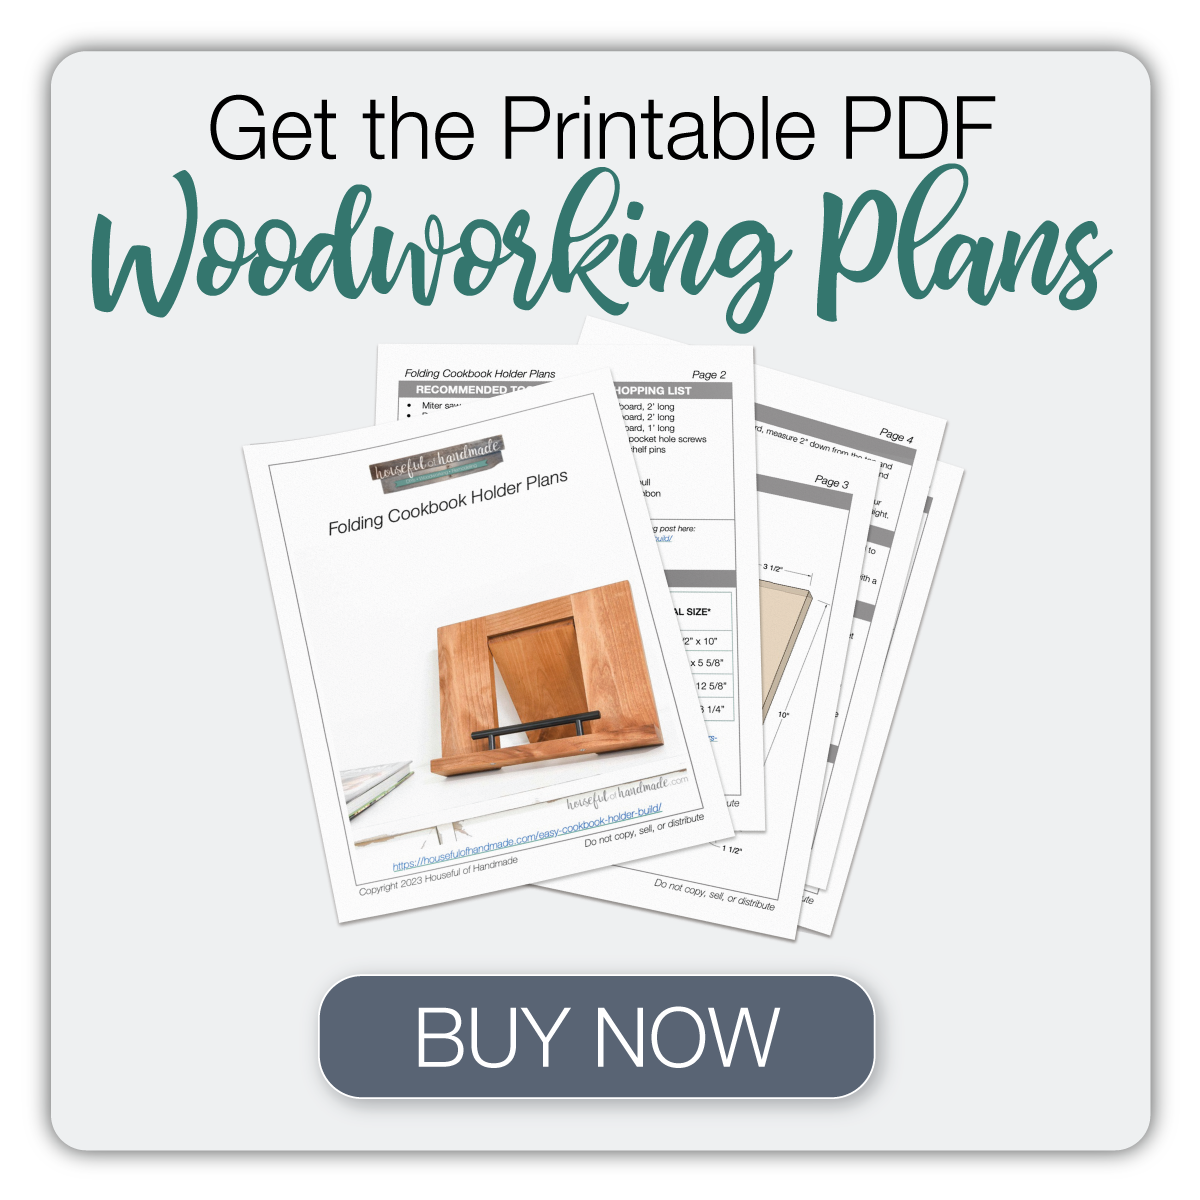 Button to buy the printable PDF plans for the folding cookbook holder. 